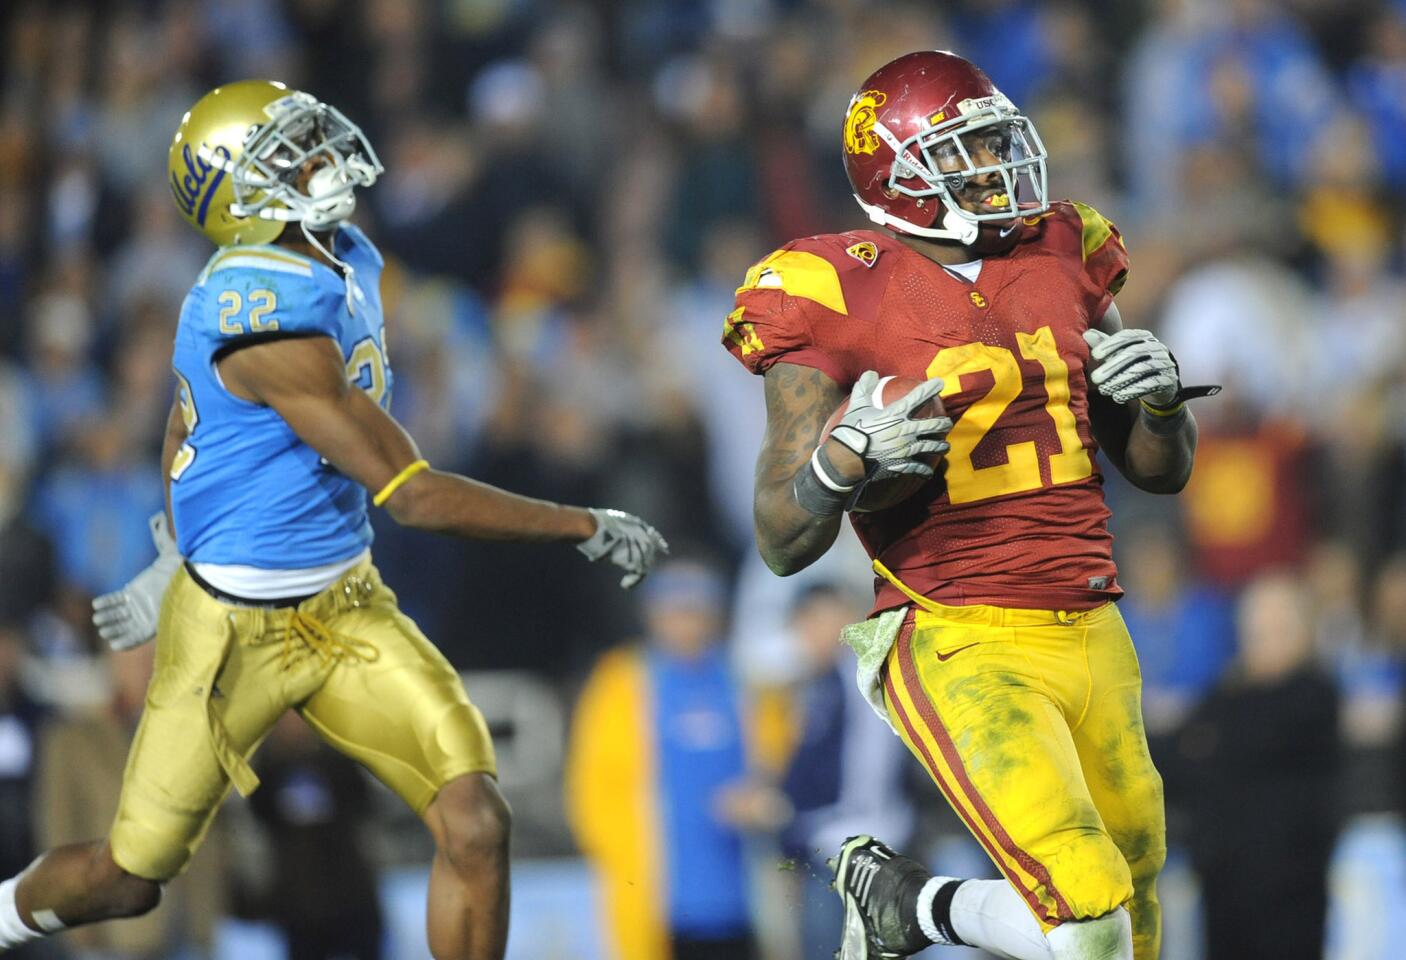 USC running back Allen Bradford beats UCLA's Sheldon Price to the end zone for a touchdown in the fourth quarter of a game at the Rose Bowl on Dec. 4, 2010.